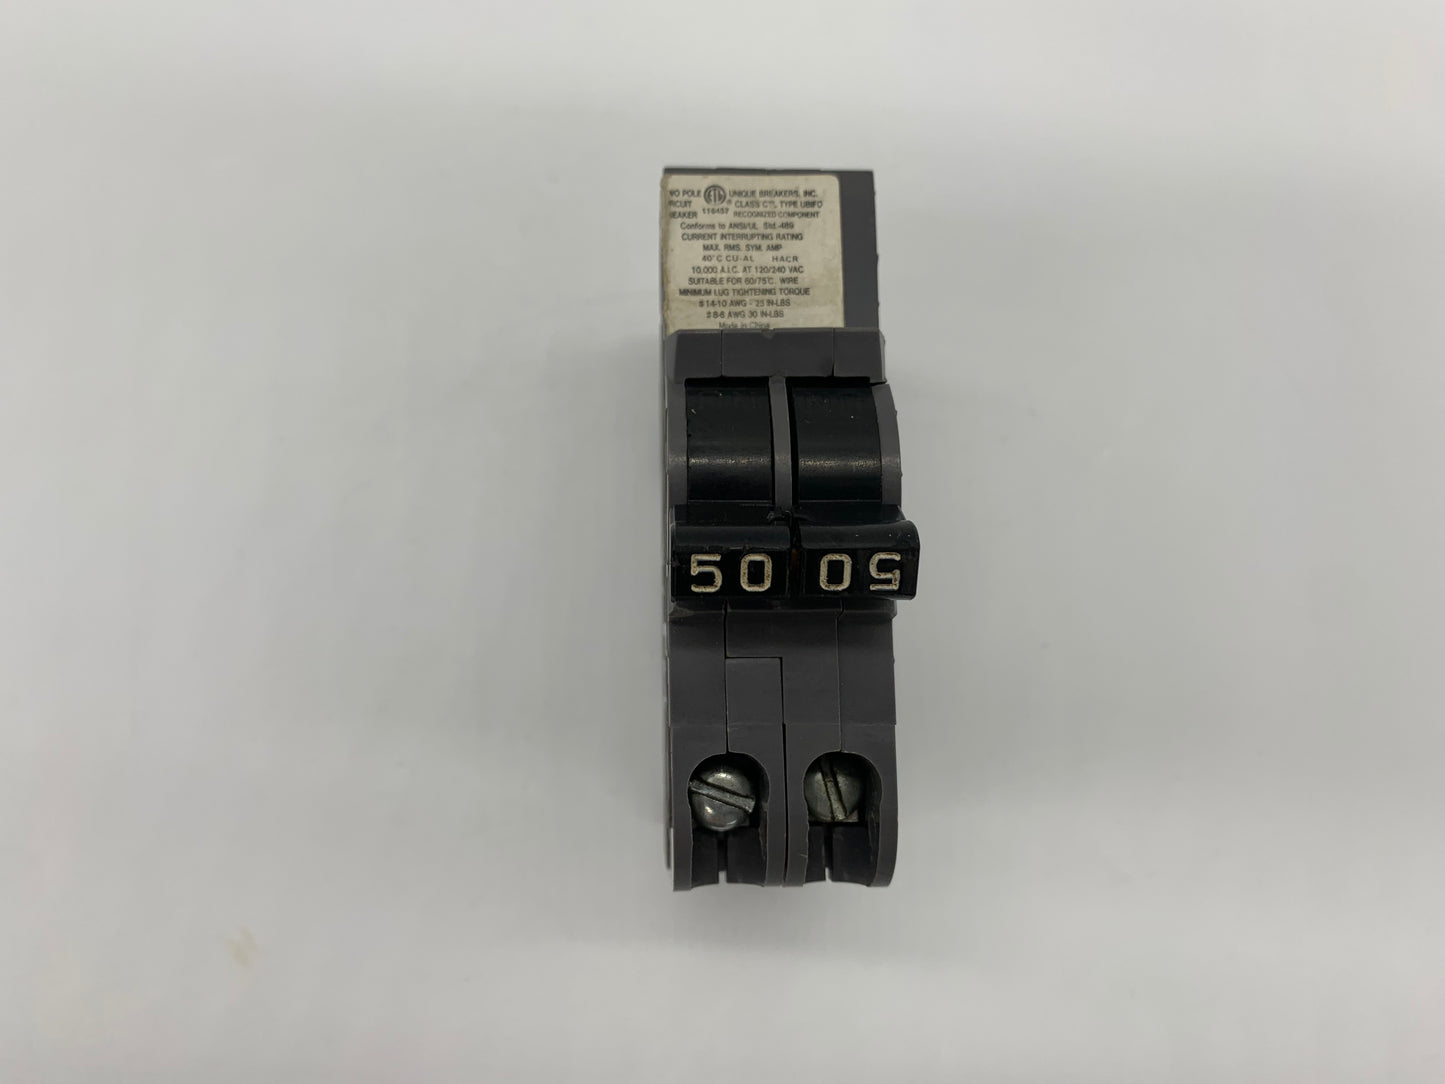 UBIF0250N Connecticut Electric Stab-Lok 2 Pole 50 Amp Thin Series - GV - Reconditioned